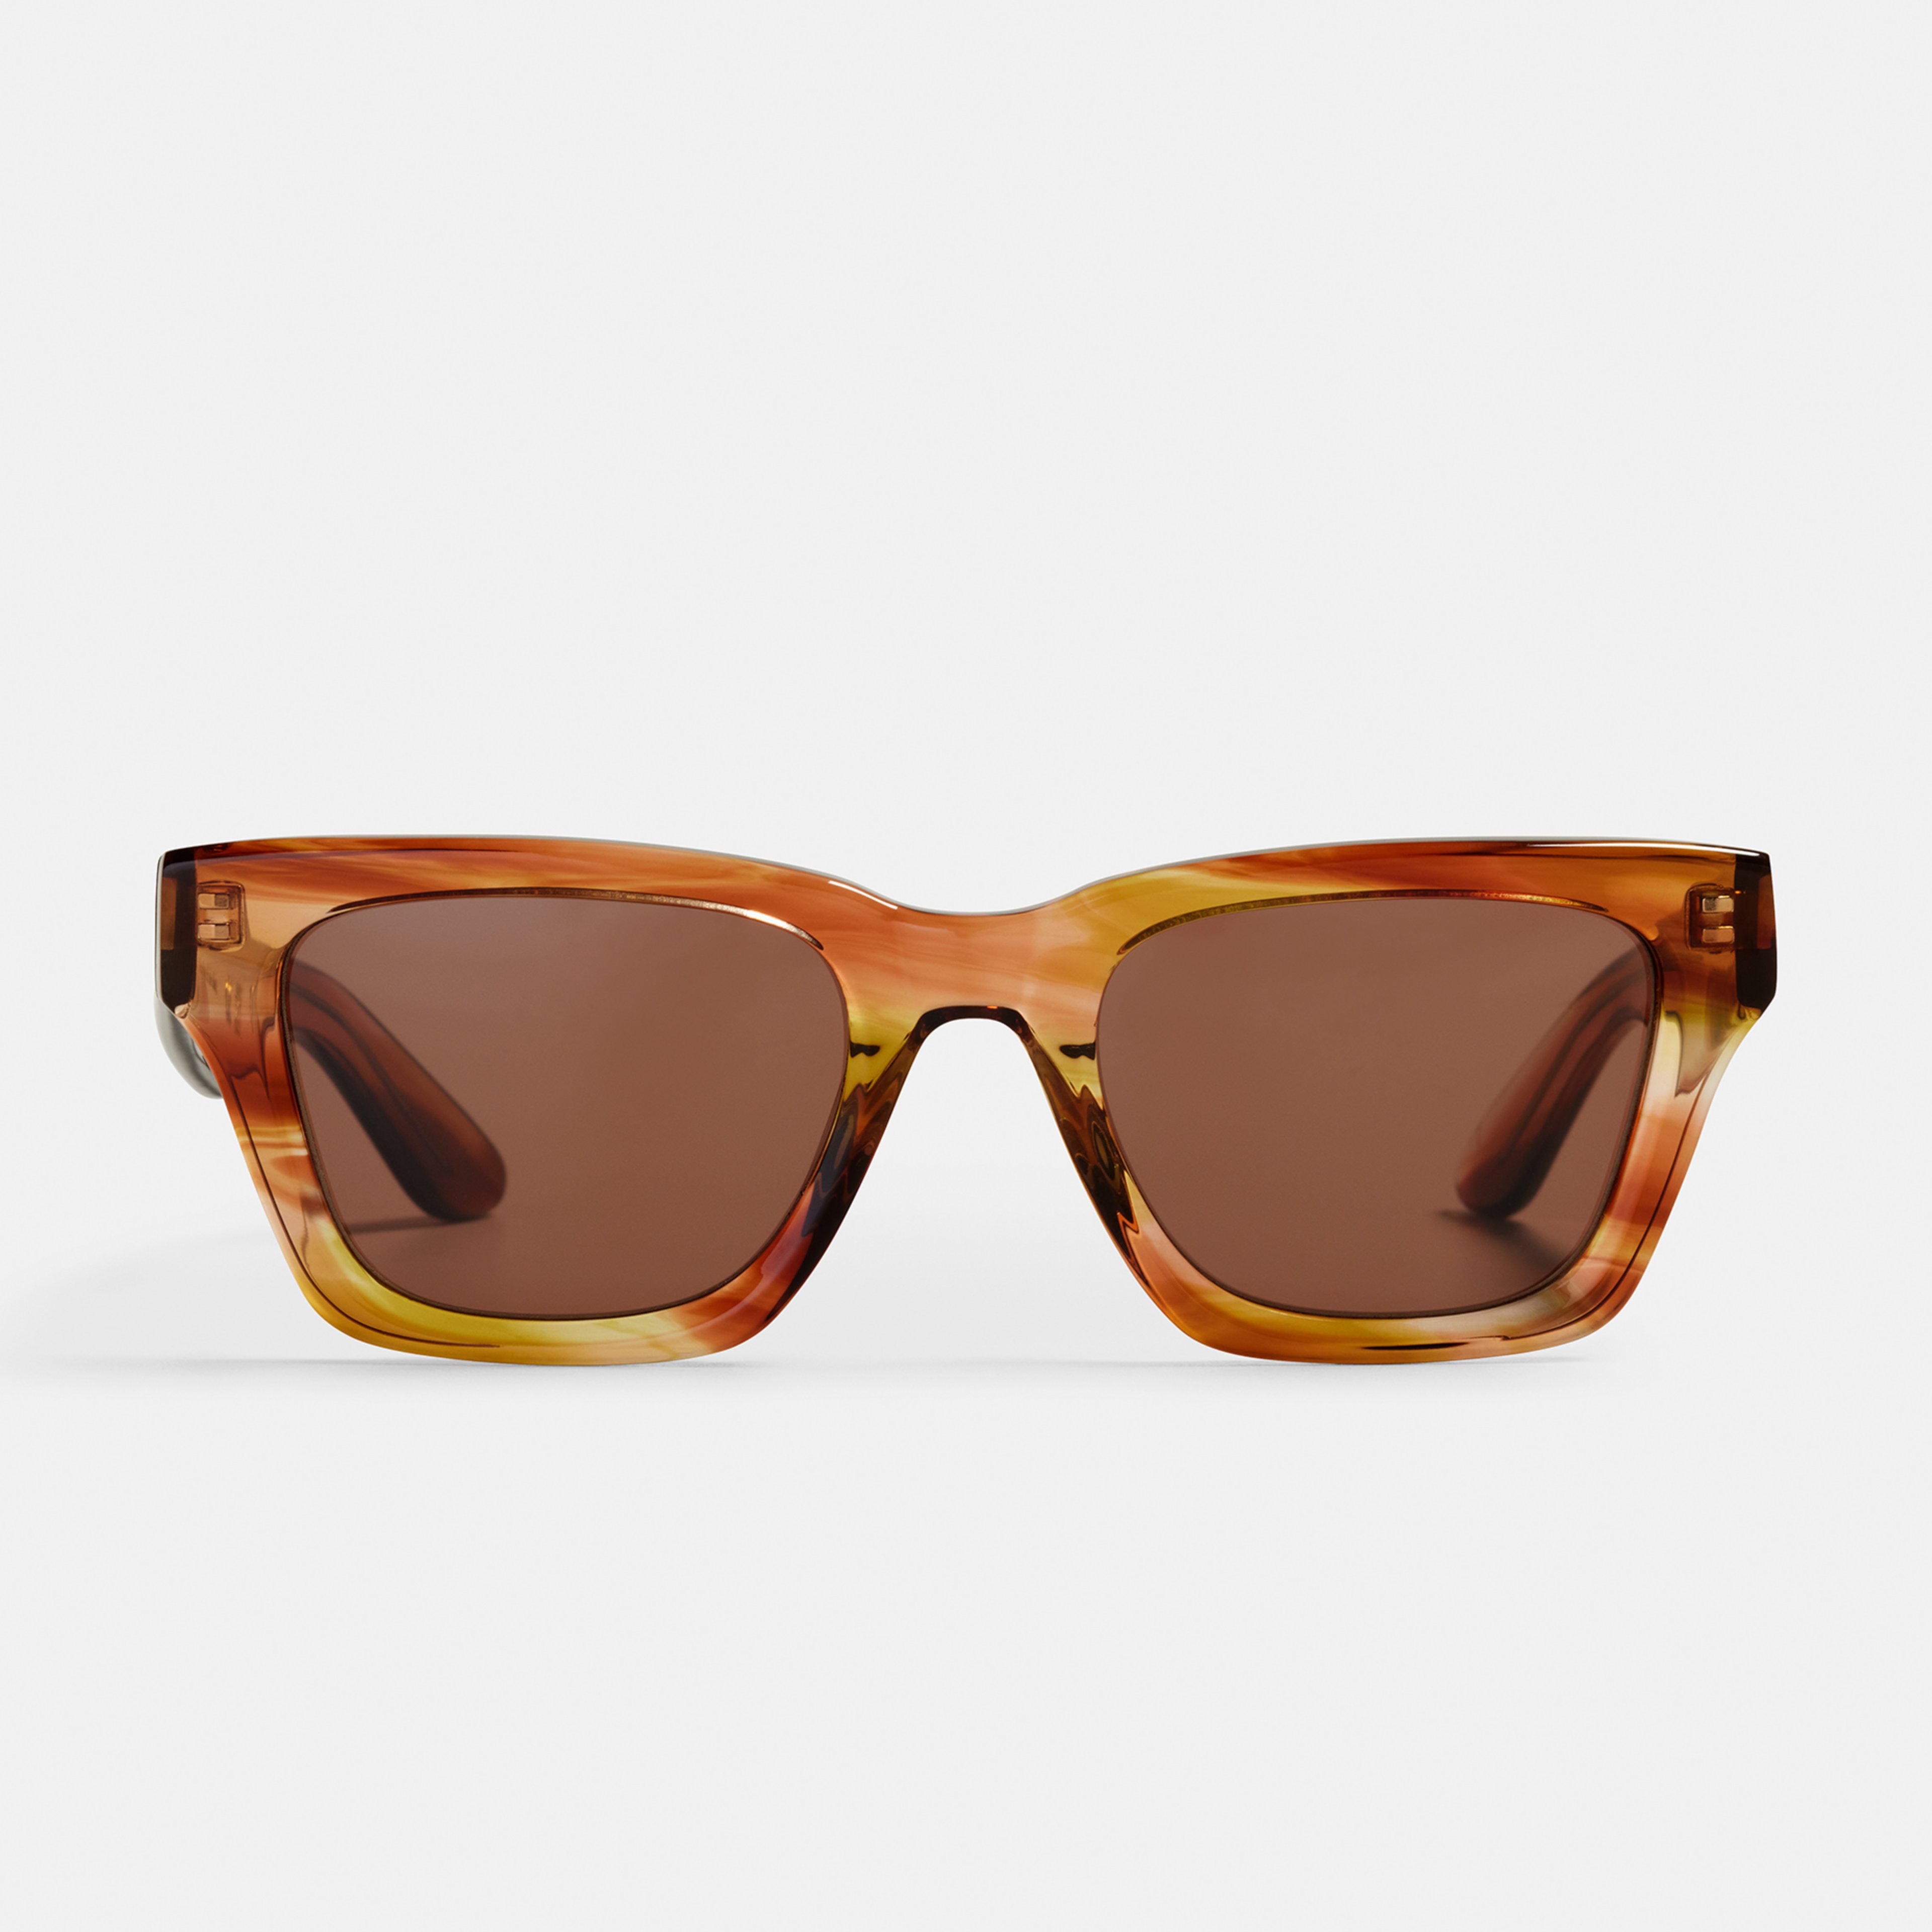 Ace & Tate Solaires | carrée Bio-acétate in Marron, Rouge